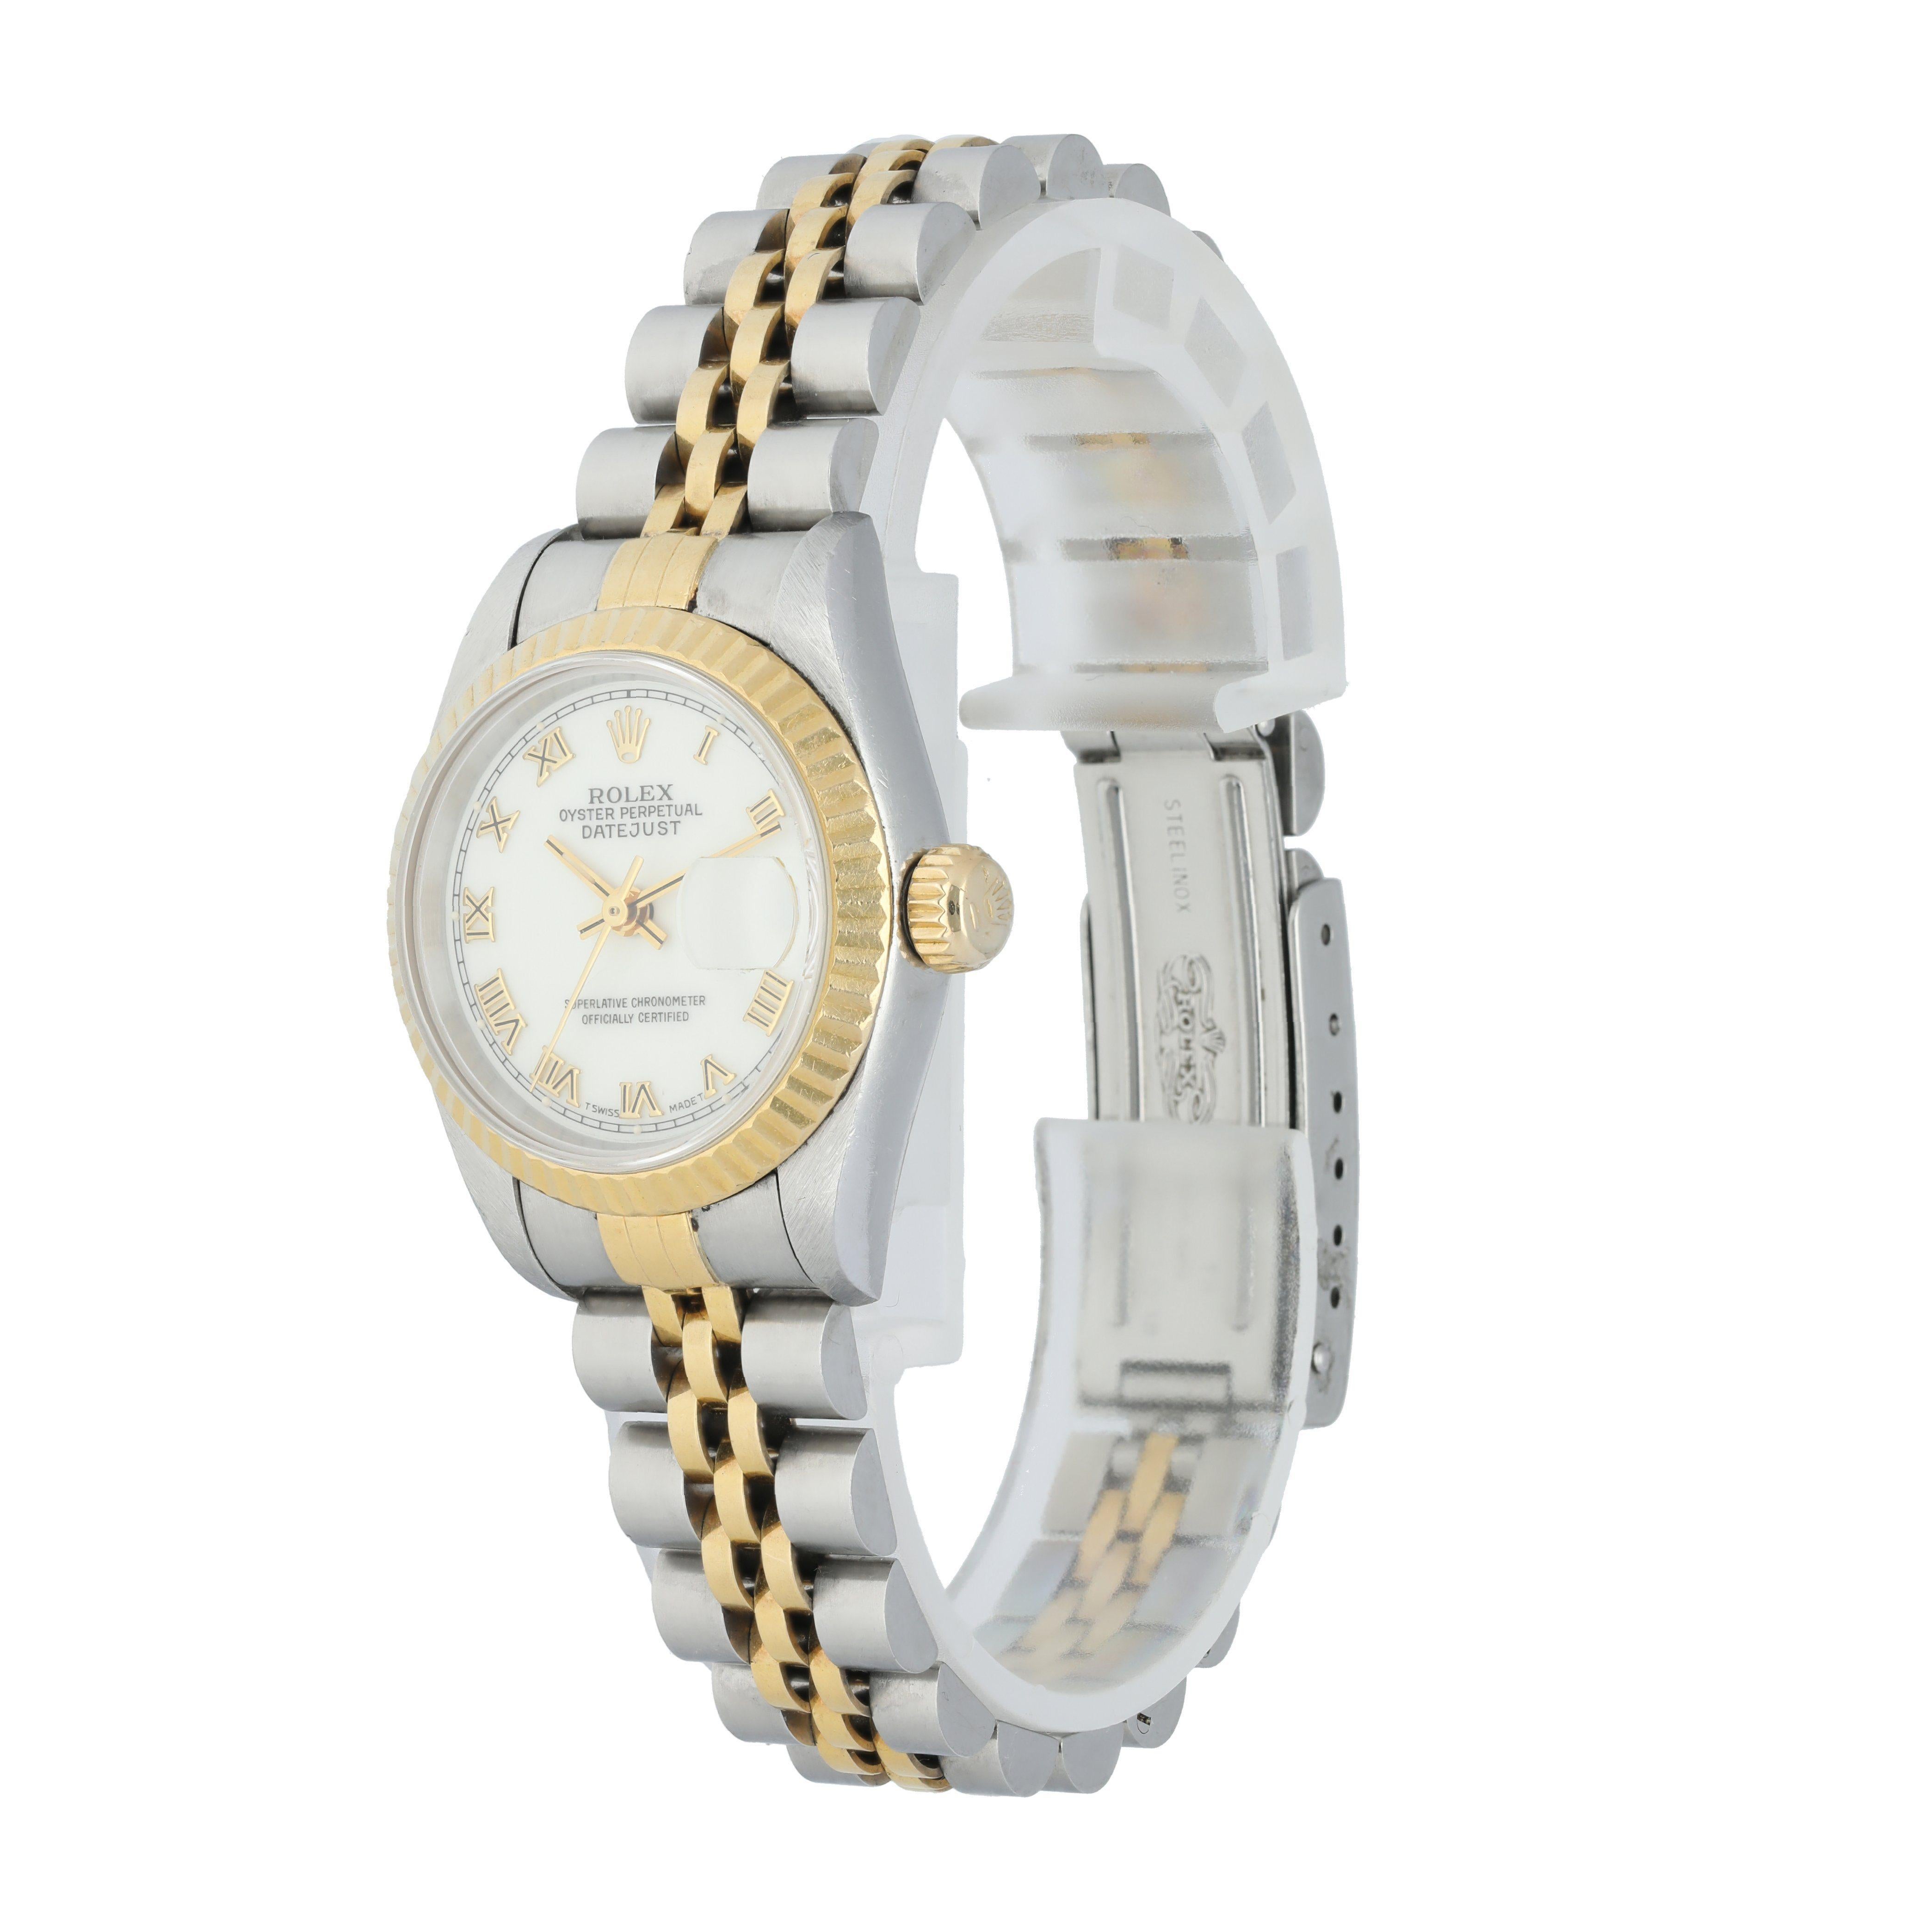 Rolex Datejust 69173 Ladies Watch. 
26mm Stainless Steel case. 
Yellow Gold Stationary bezel. 
White dial with gold hands and Roman numeral hour markers. 
Minute markers on the outer dial. 
Date display at the 3 o'clock position. 
Two-Tone Stainless